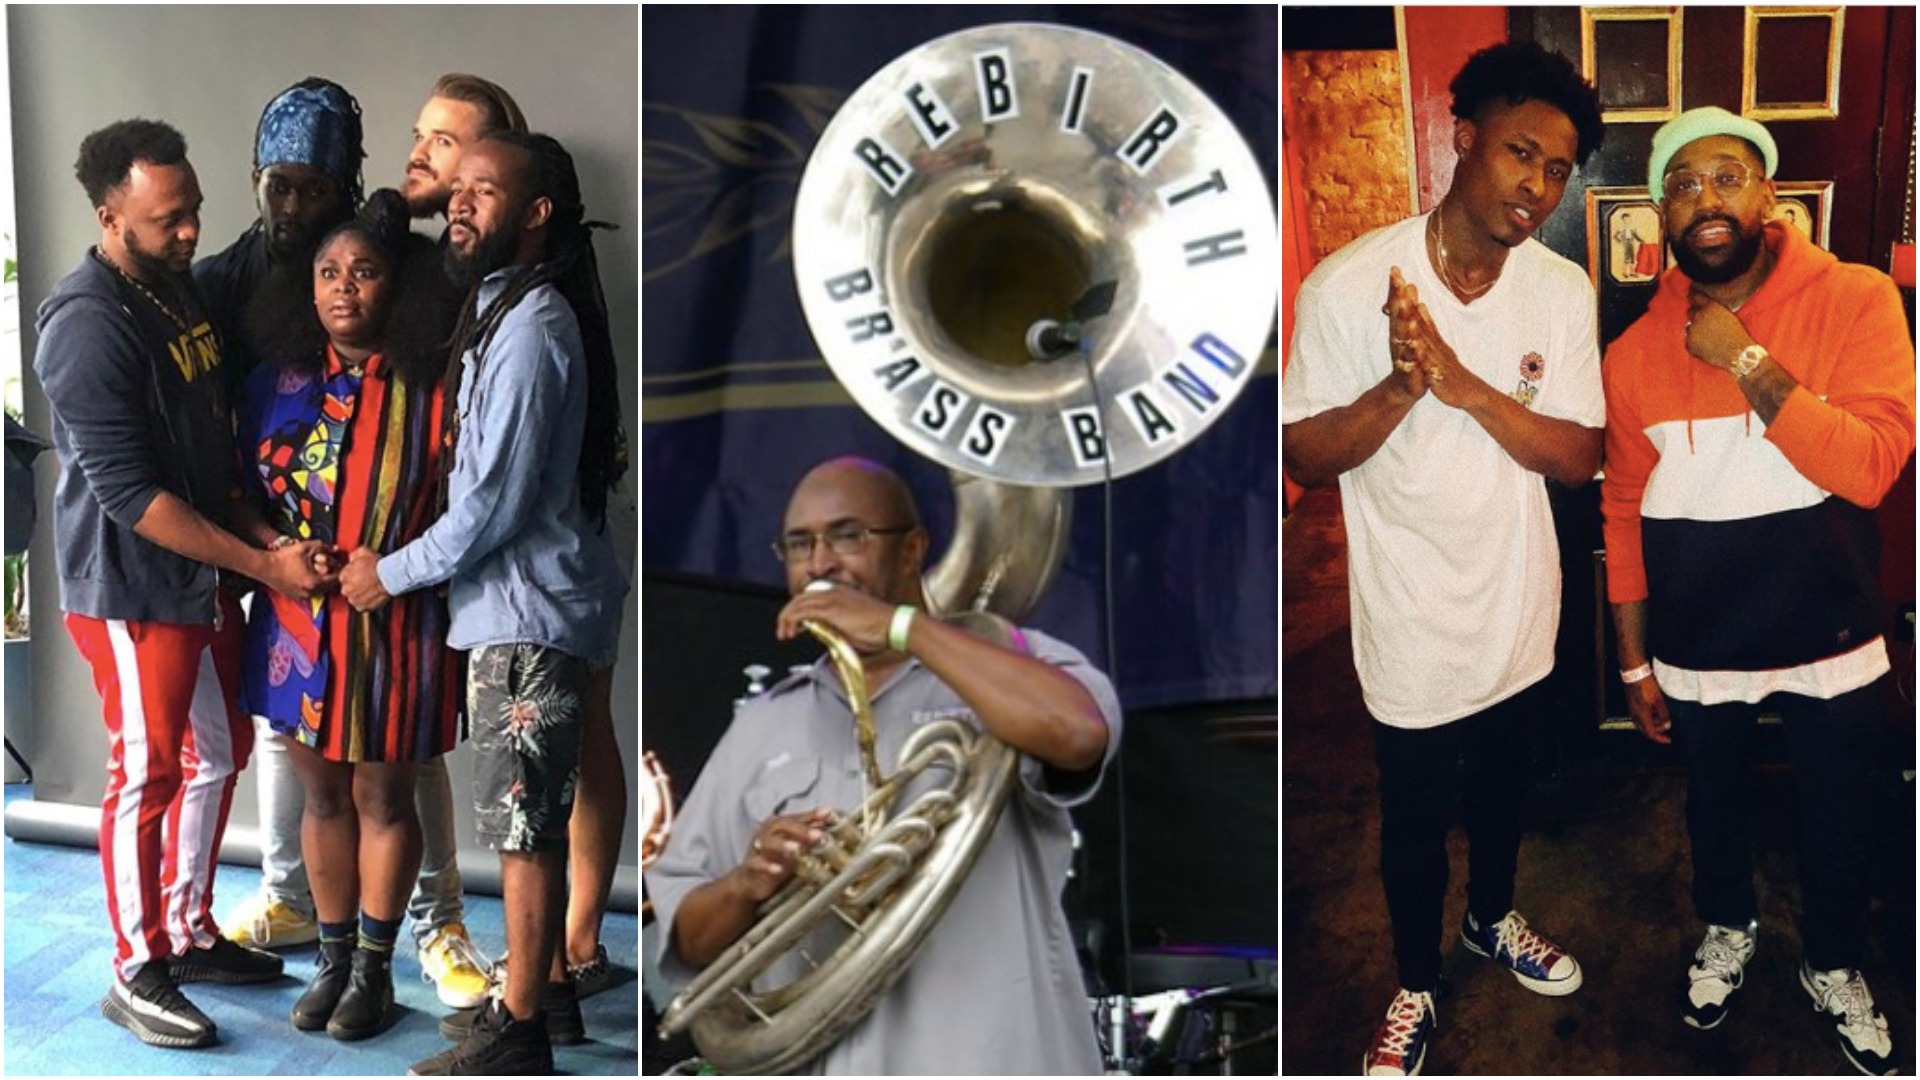 Tank and The Bangas, Rebirth Brass Band, and Lucky Daye and PJ Morton side by side